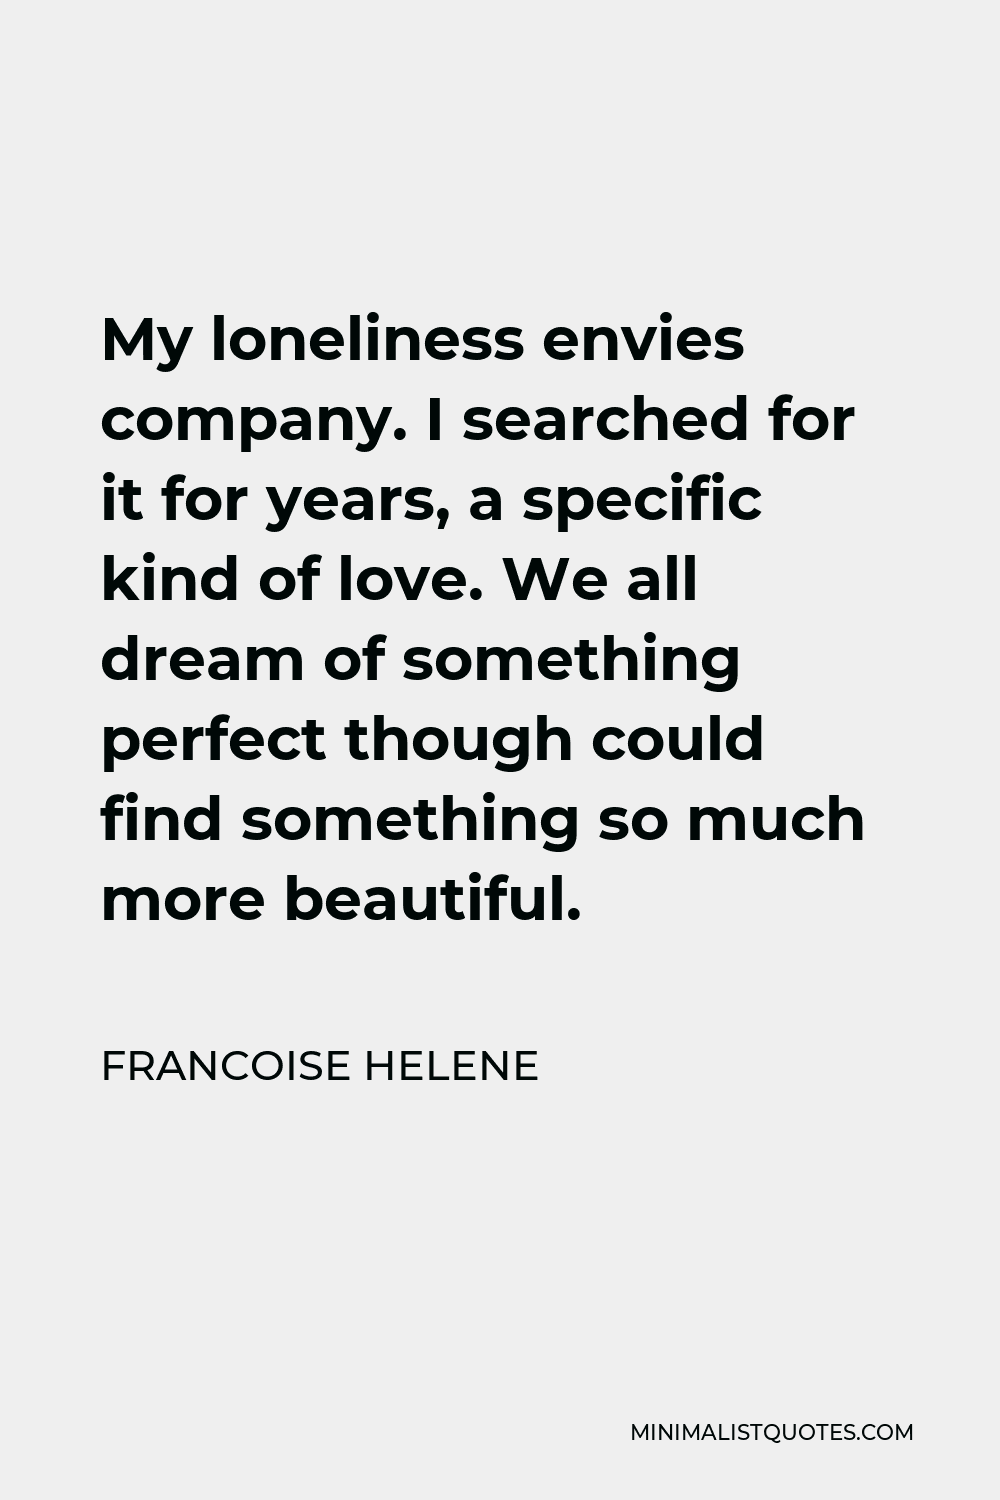 Francoise Helene Quote - My loneliness envies company. I searched for it for years, a specific kind of love. We all dream of something perfect though could find something so much more beautiful.